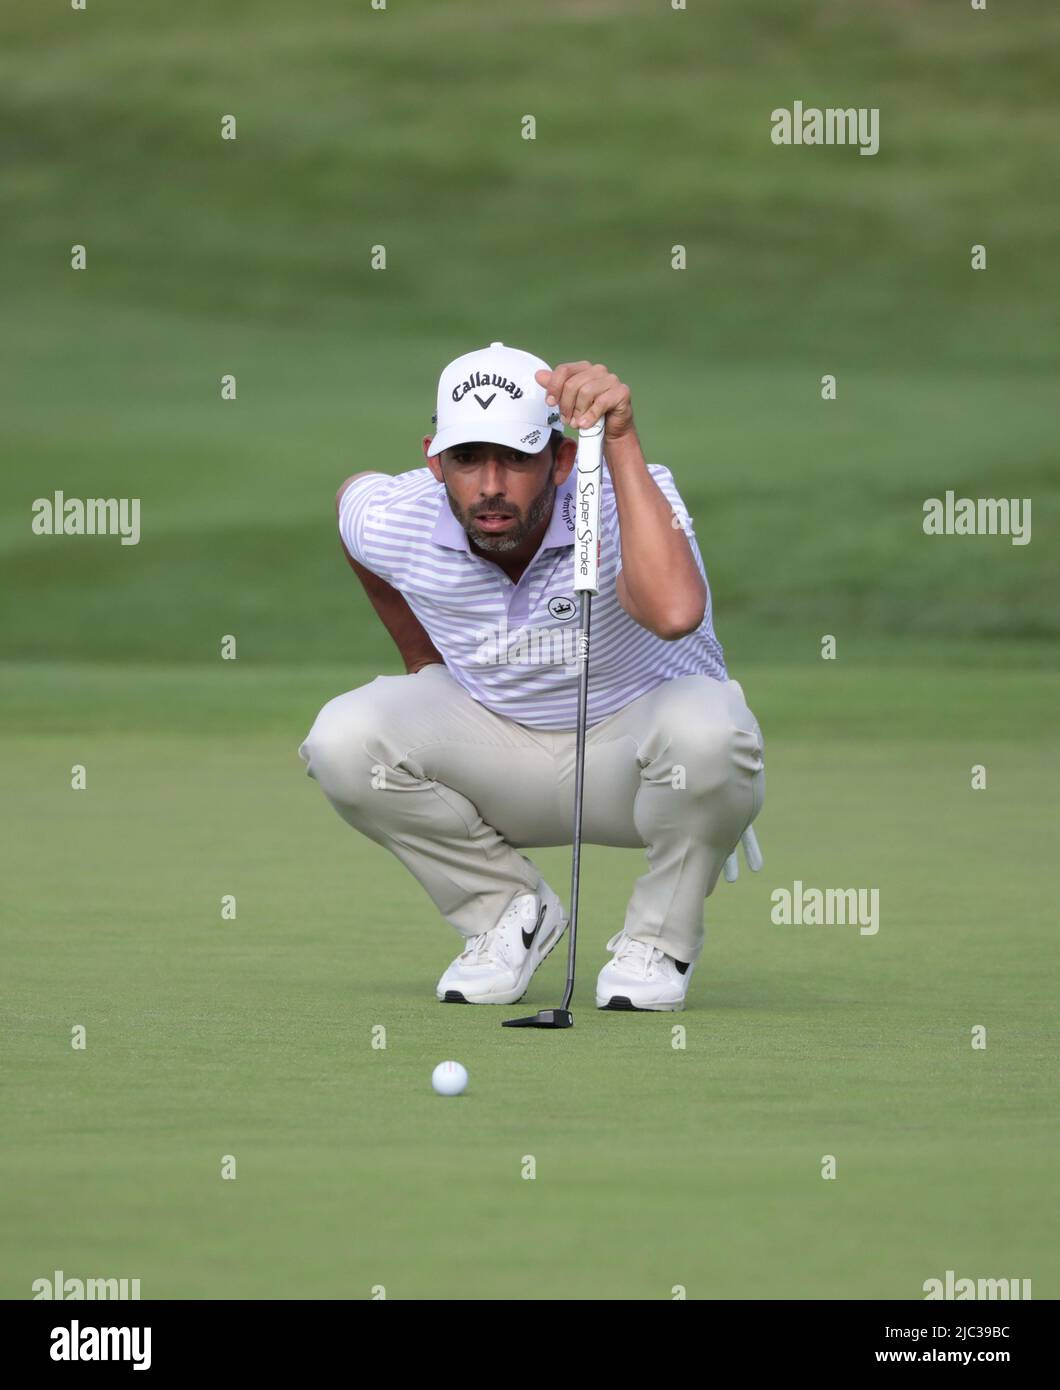 London, UK. 09th June, 2022. South Africa's Charl Schwartzel lines up a putt on the 18th green during the first round of the inaugural LIV Golf event at the Centurion club in Hertfordshire on Thurssday, June 09, 2022.The event is 12 teams of four players competing over 54 holes for a prize pot of $25million dollars to the winning team. Photo by Hugo Philpott/UPI Credit: UPI/Alamy Live News Stock Photo